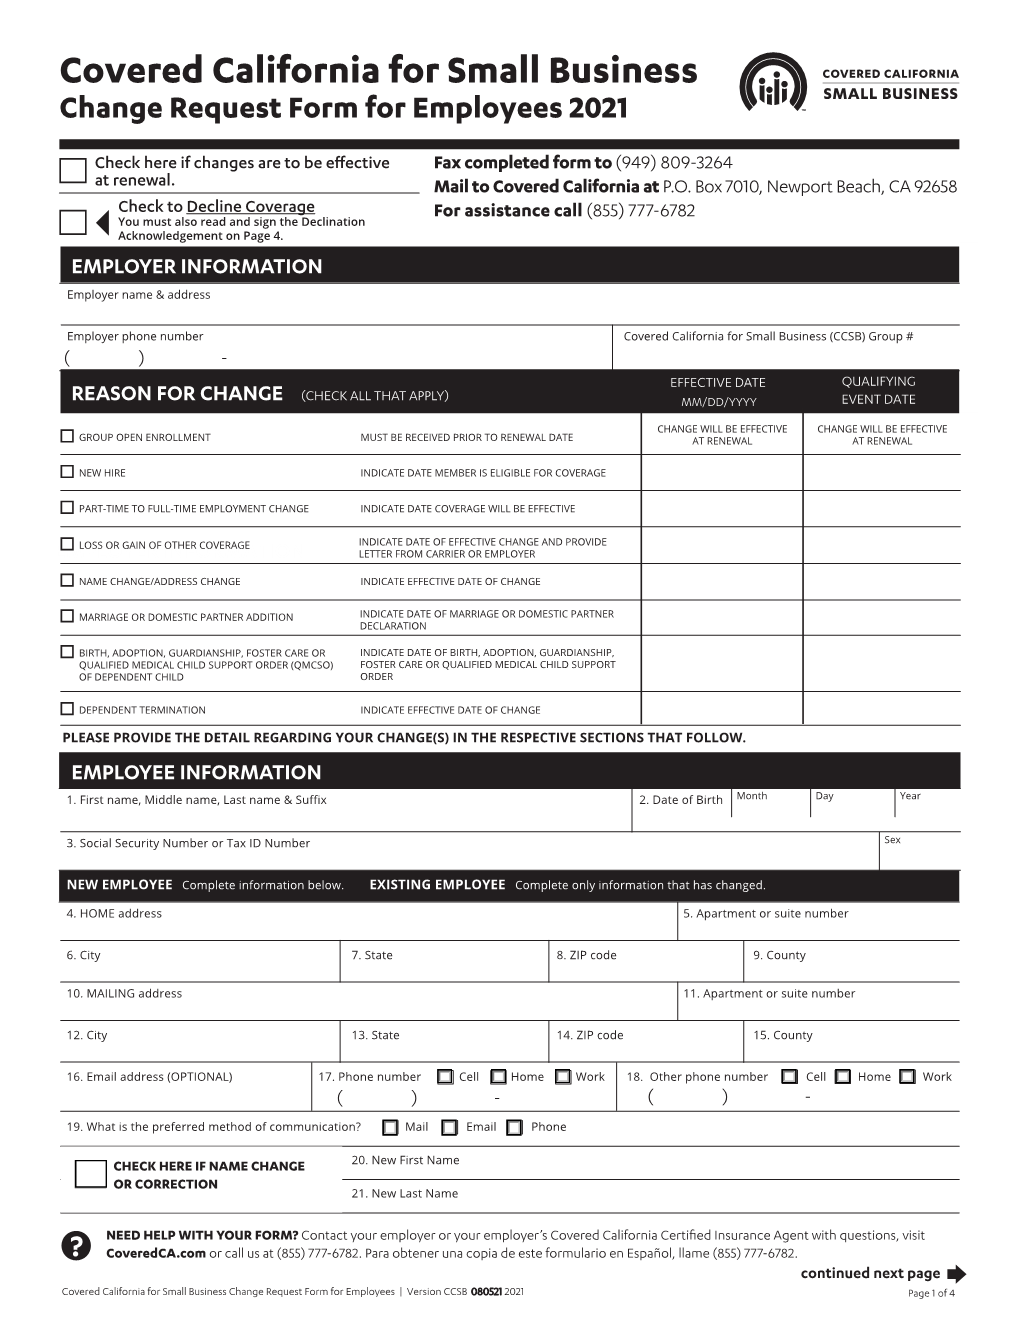 Covered California for Small Business Change Request Form for Employees 2021